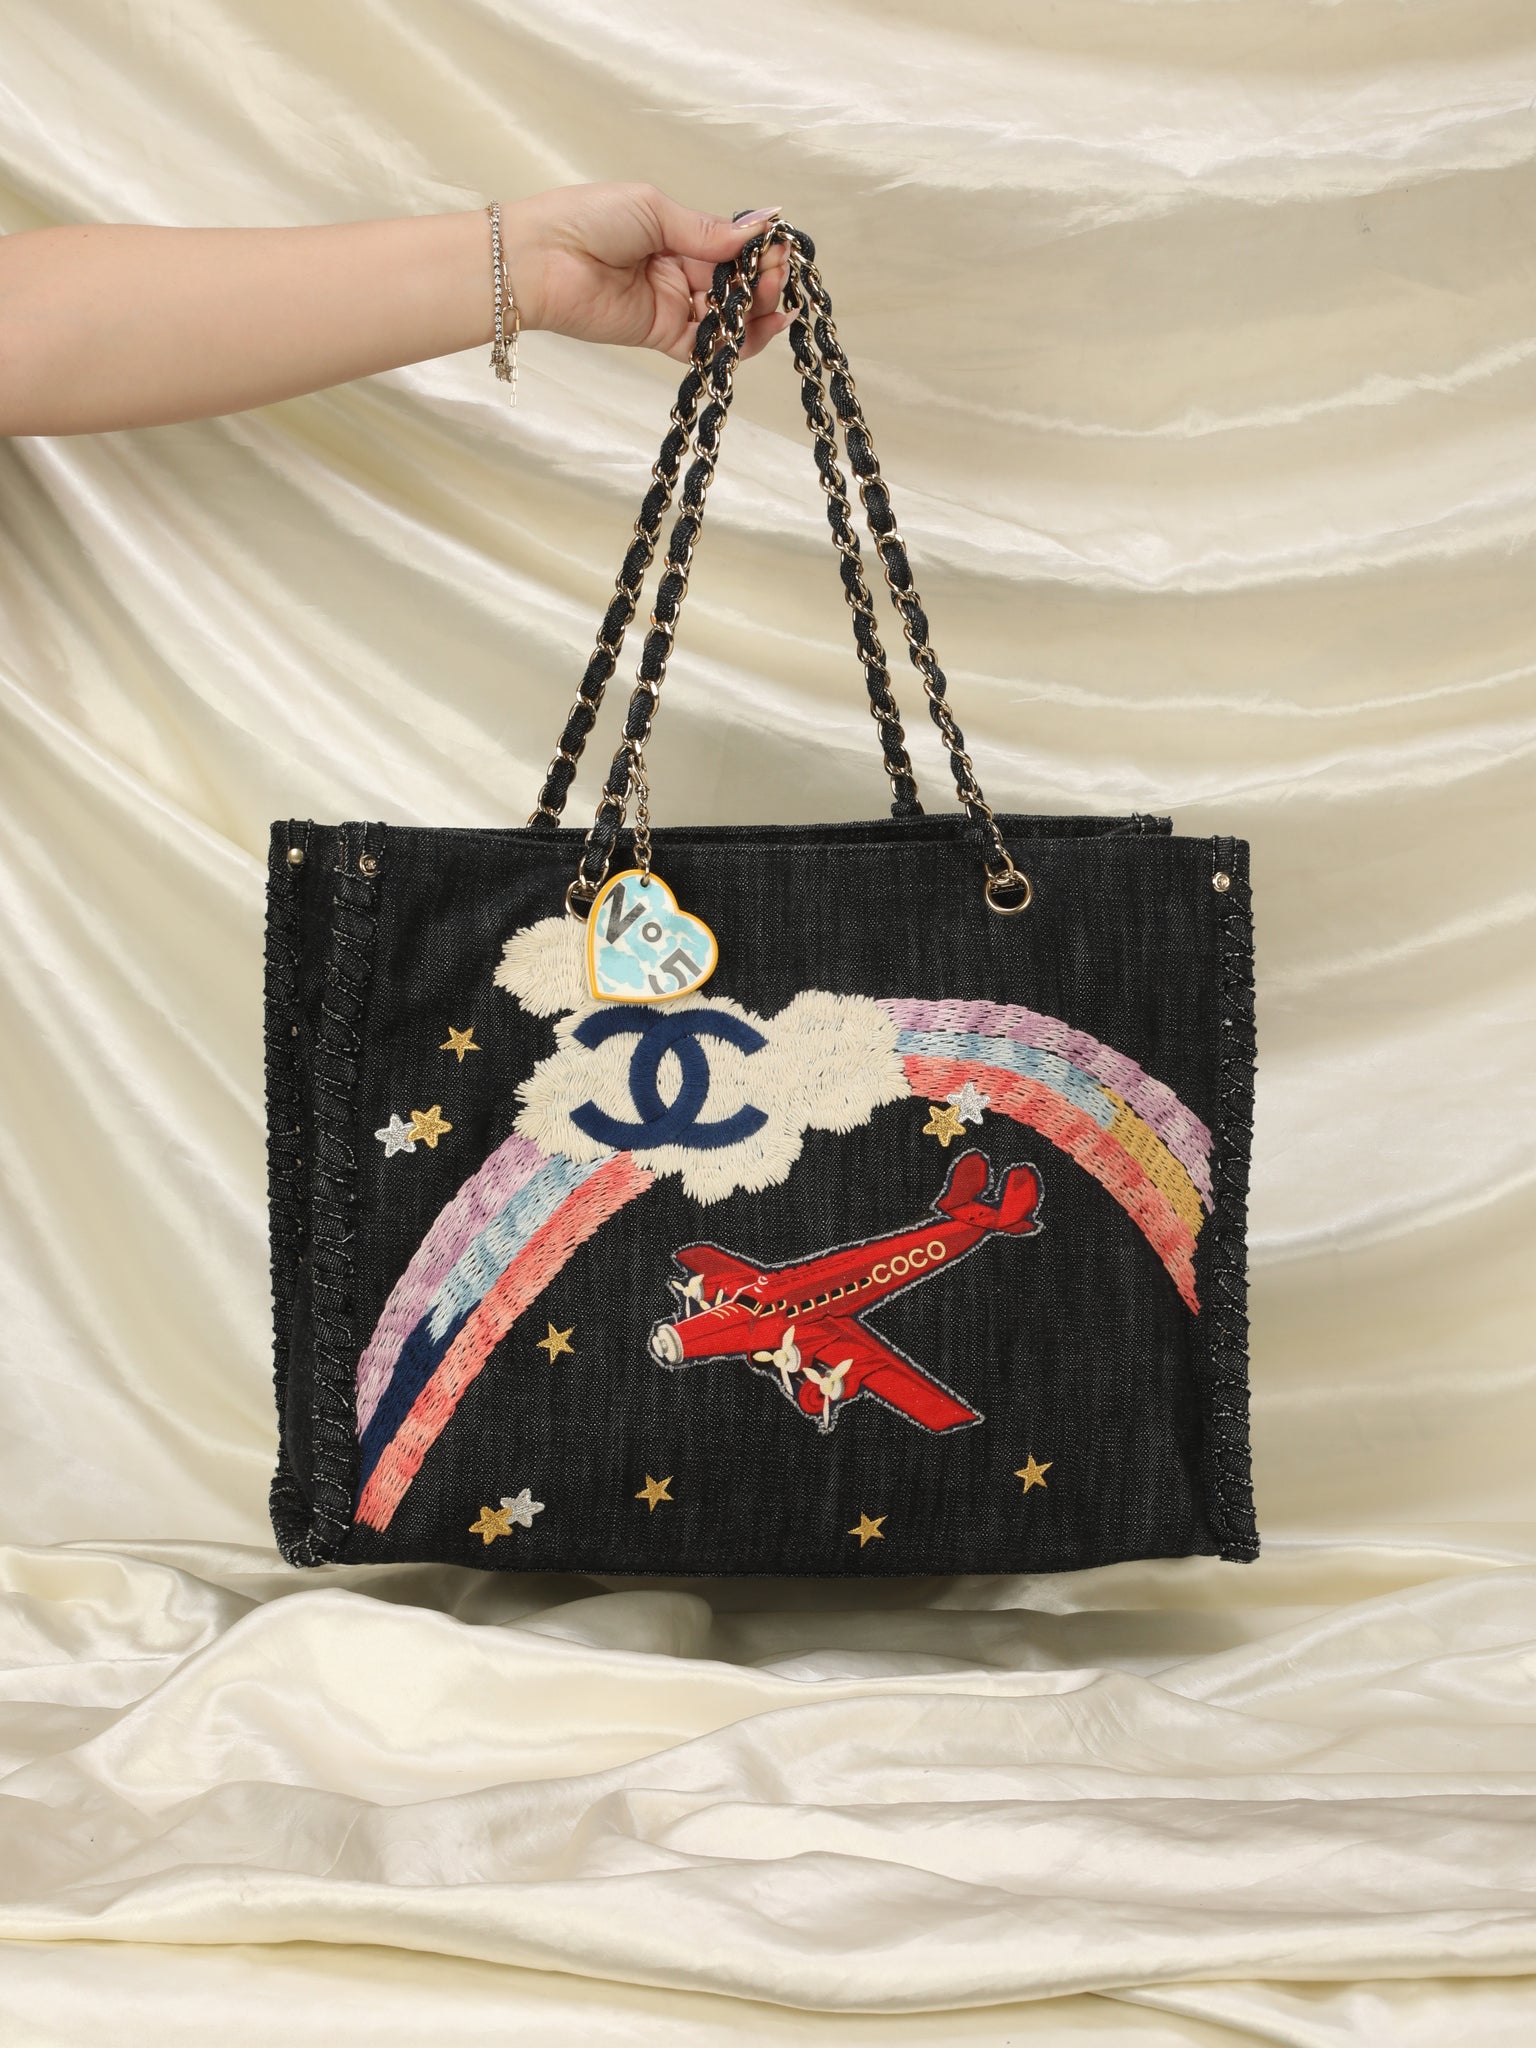 Chanel Limited Edition Red Stitched Coco Handle Bag at 1stDibs